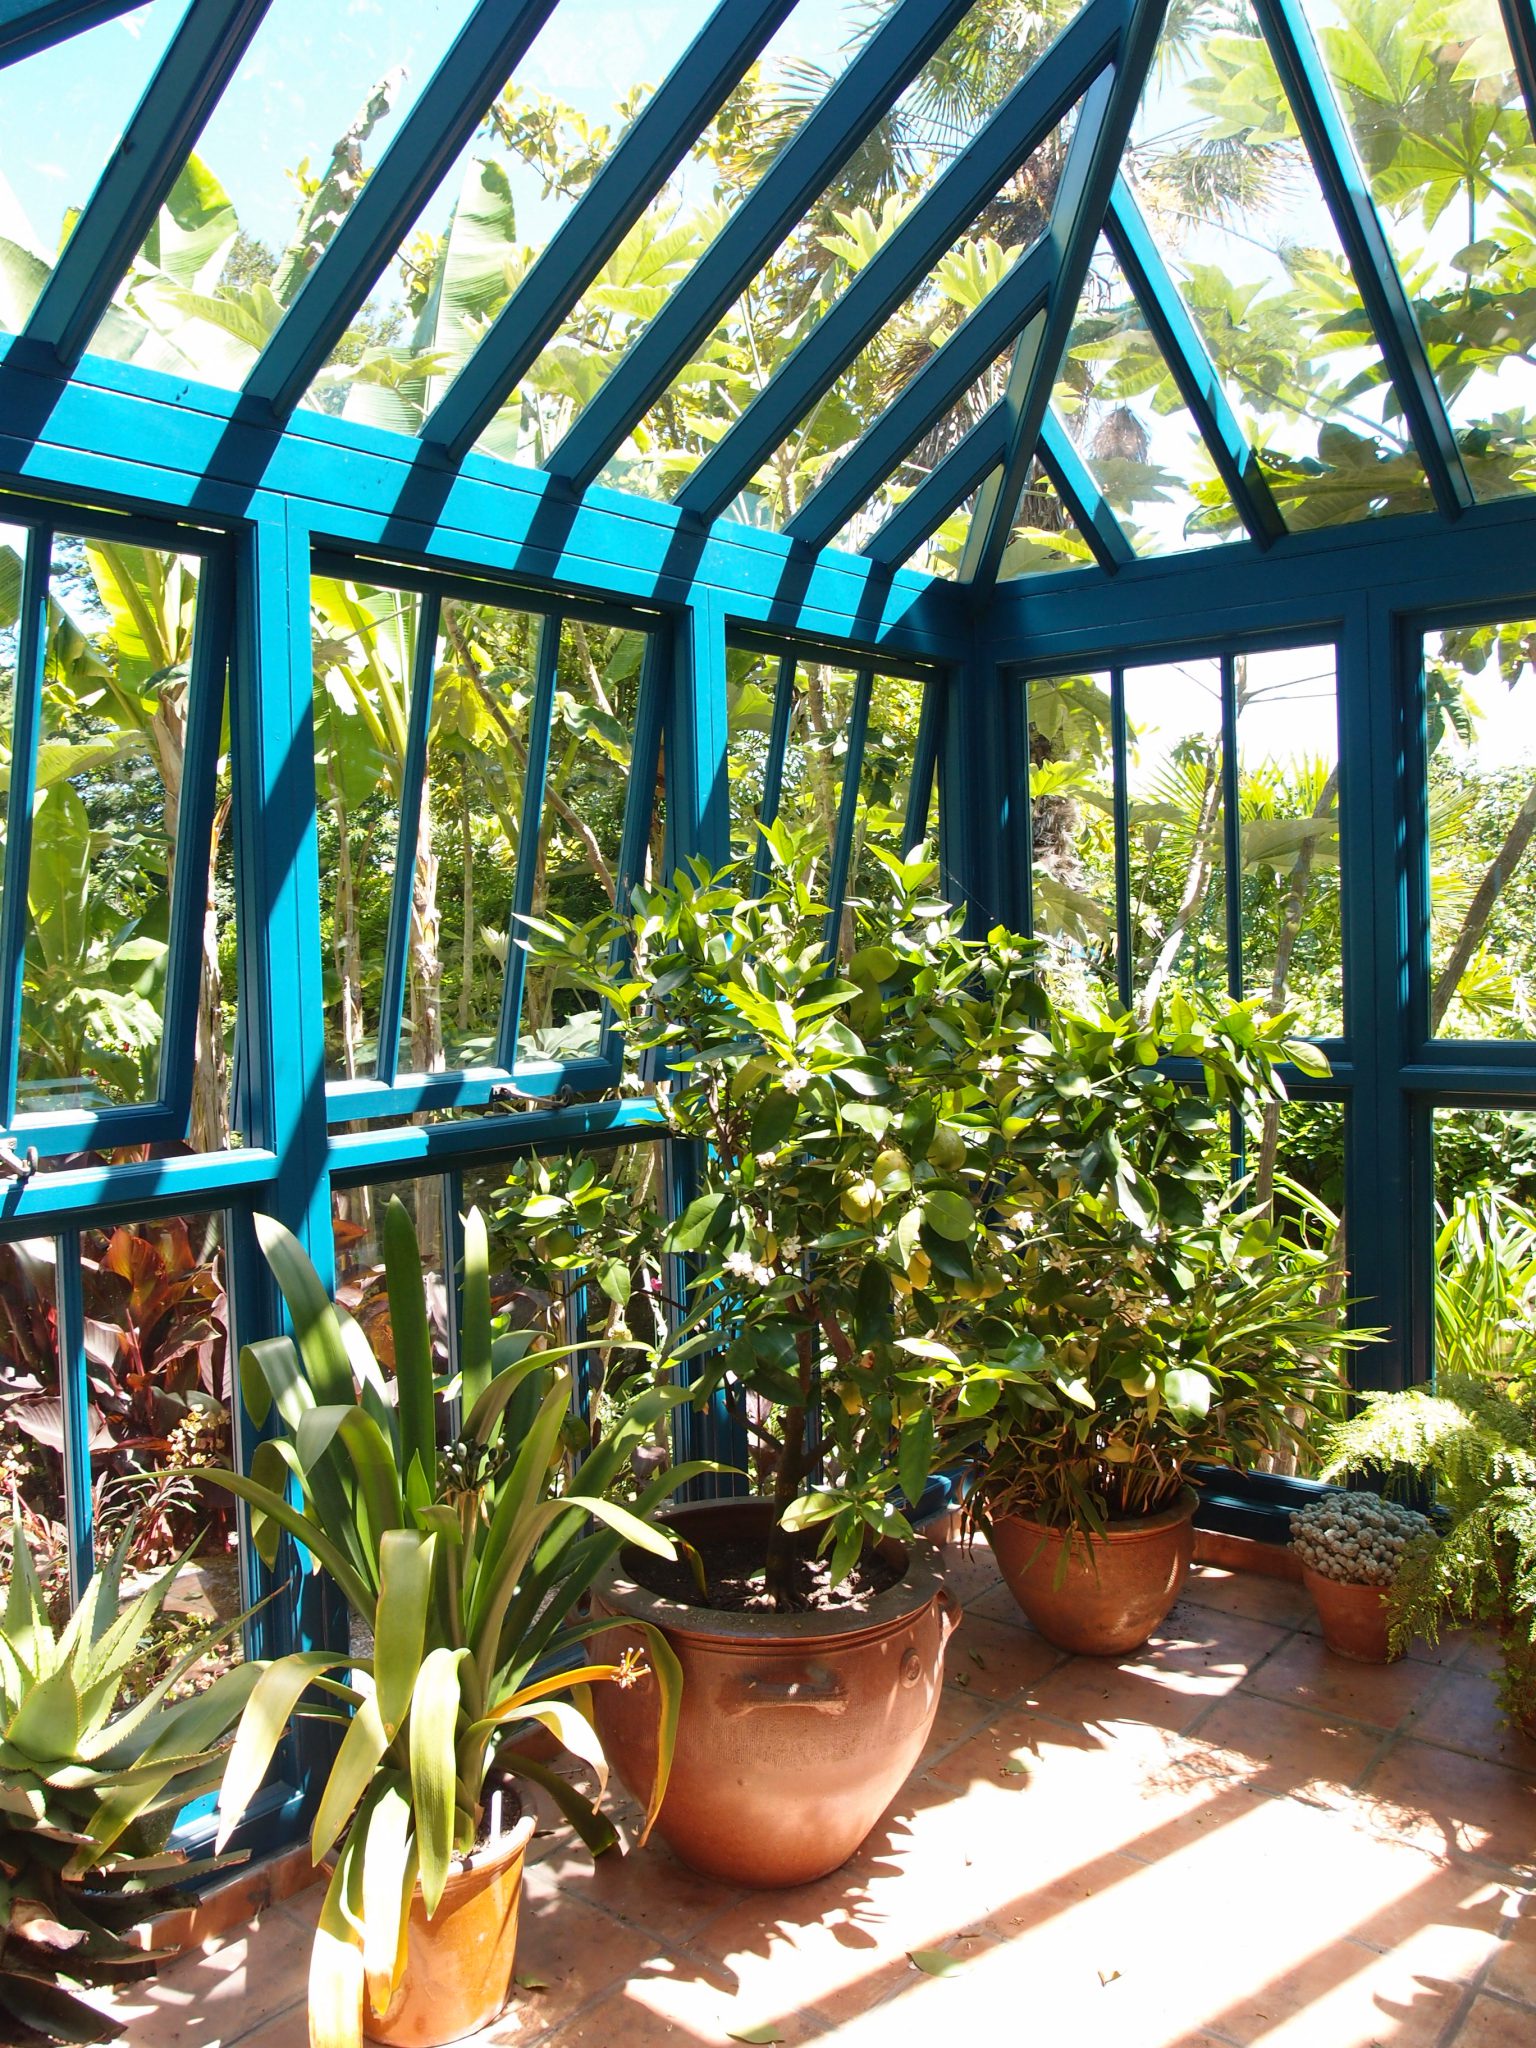 The Banana Garden's Greenhouse: painted in Overbeck's Signature Blue.